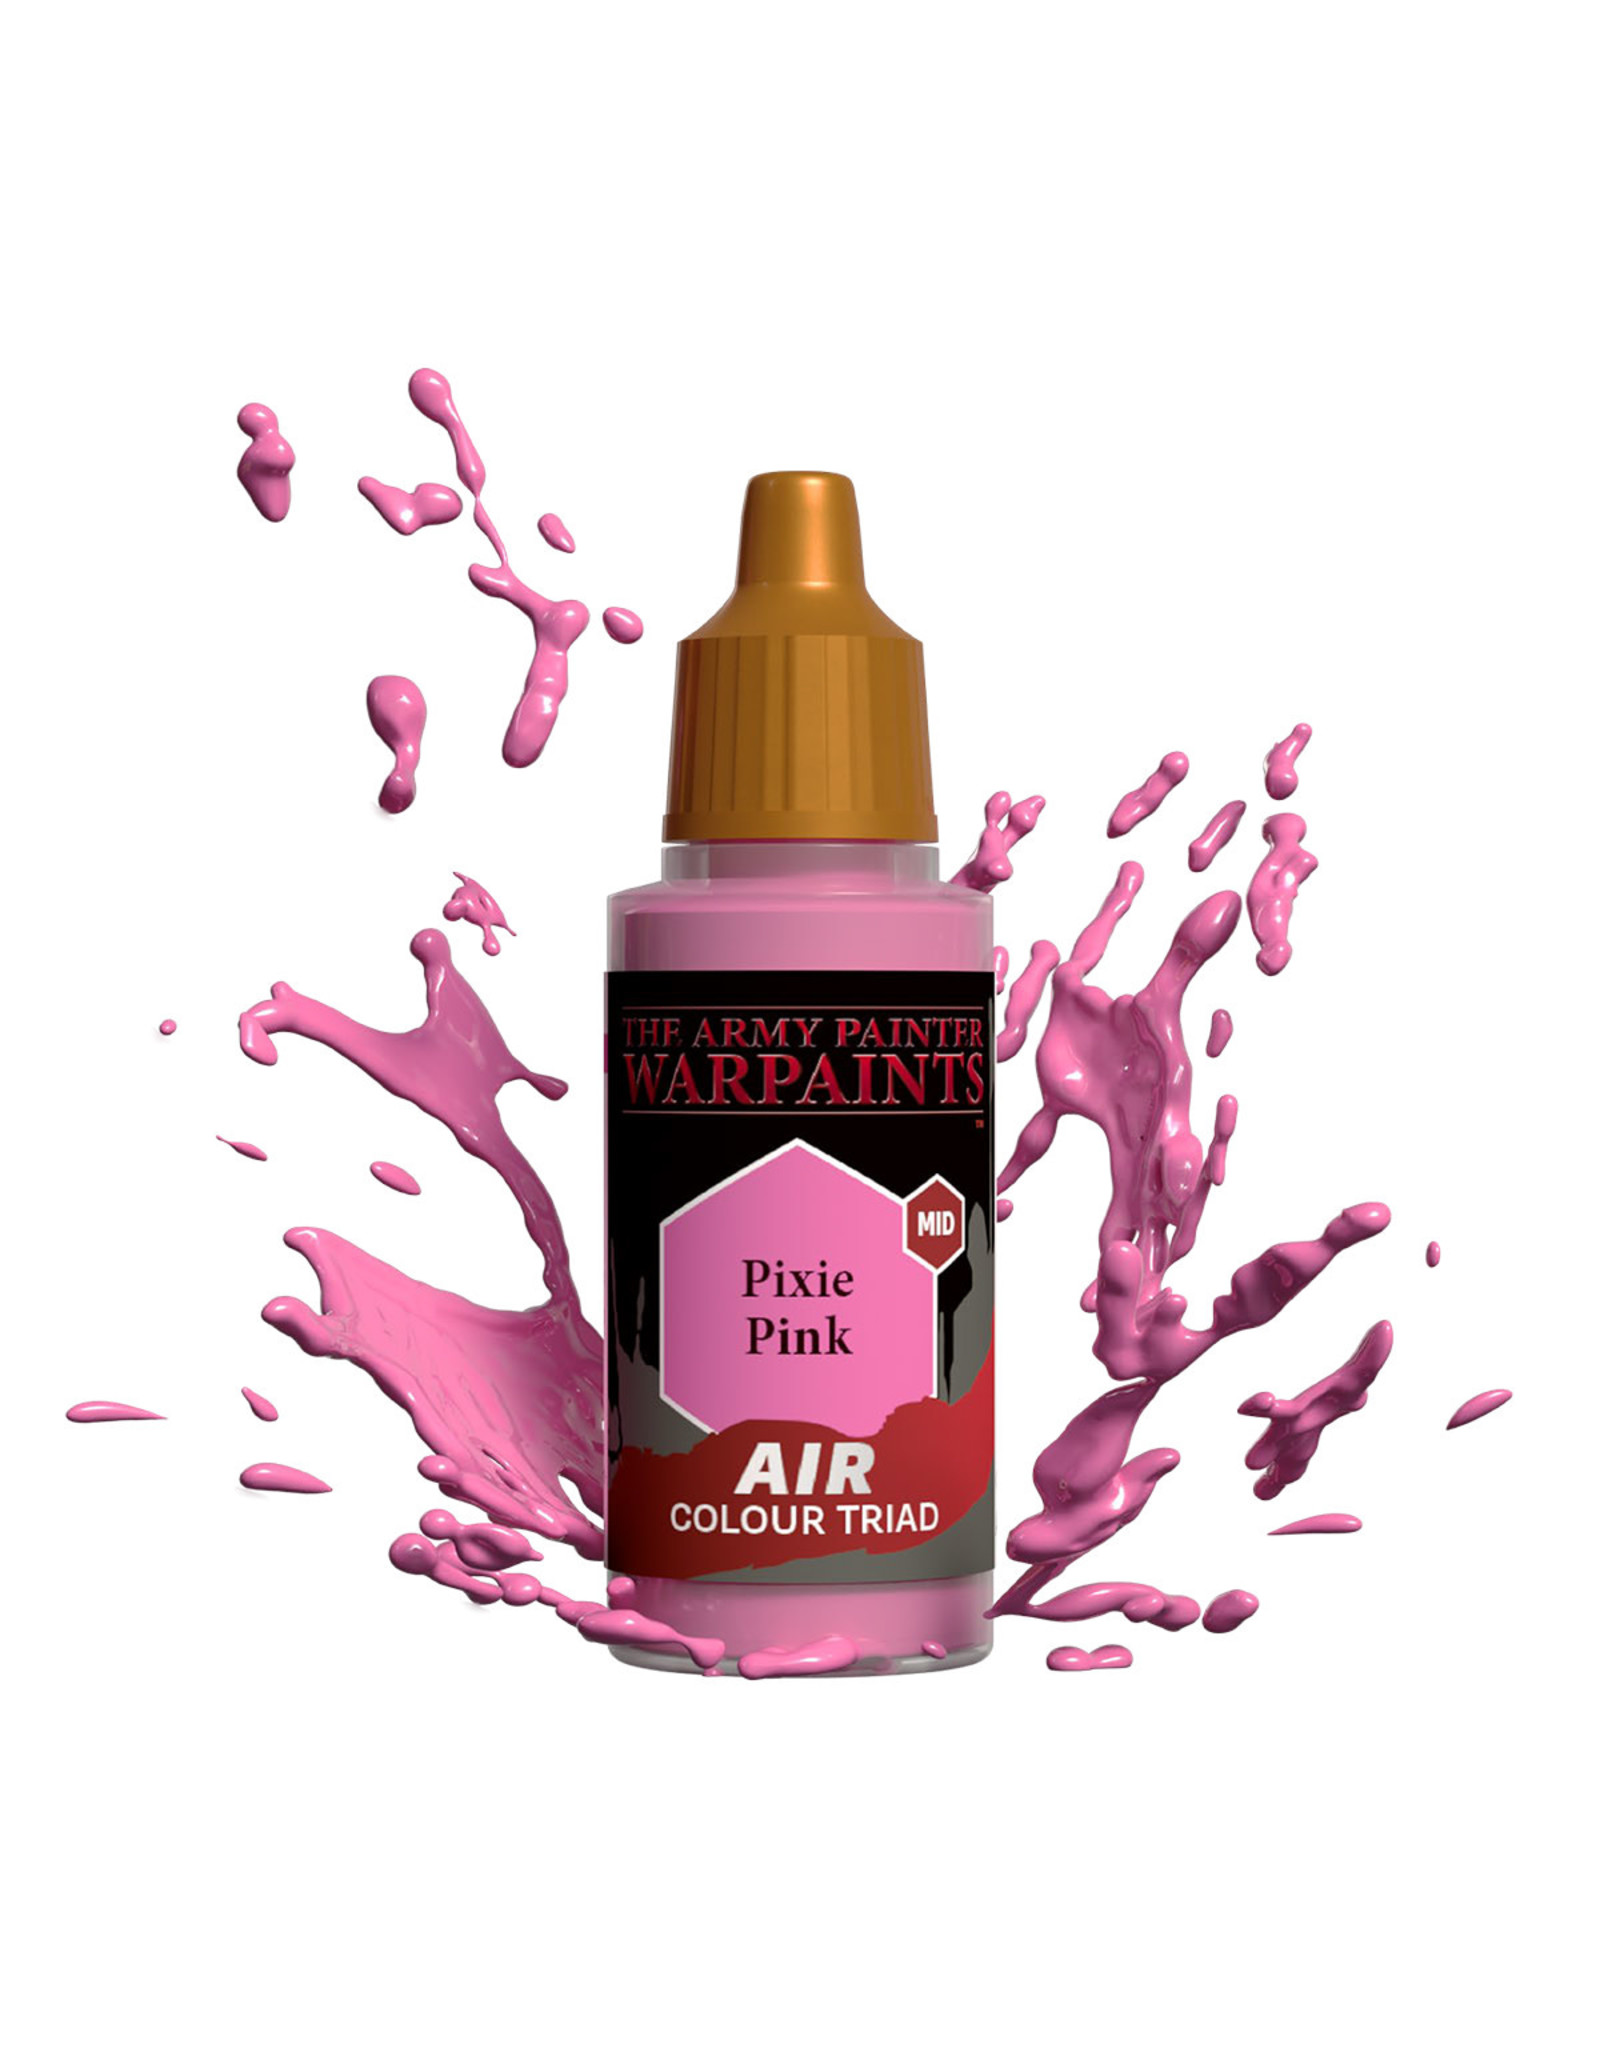 The Army Painter The Army Painter Warpaints Air: Pixie Pink